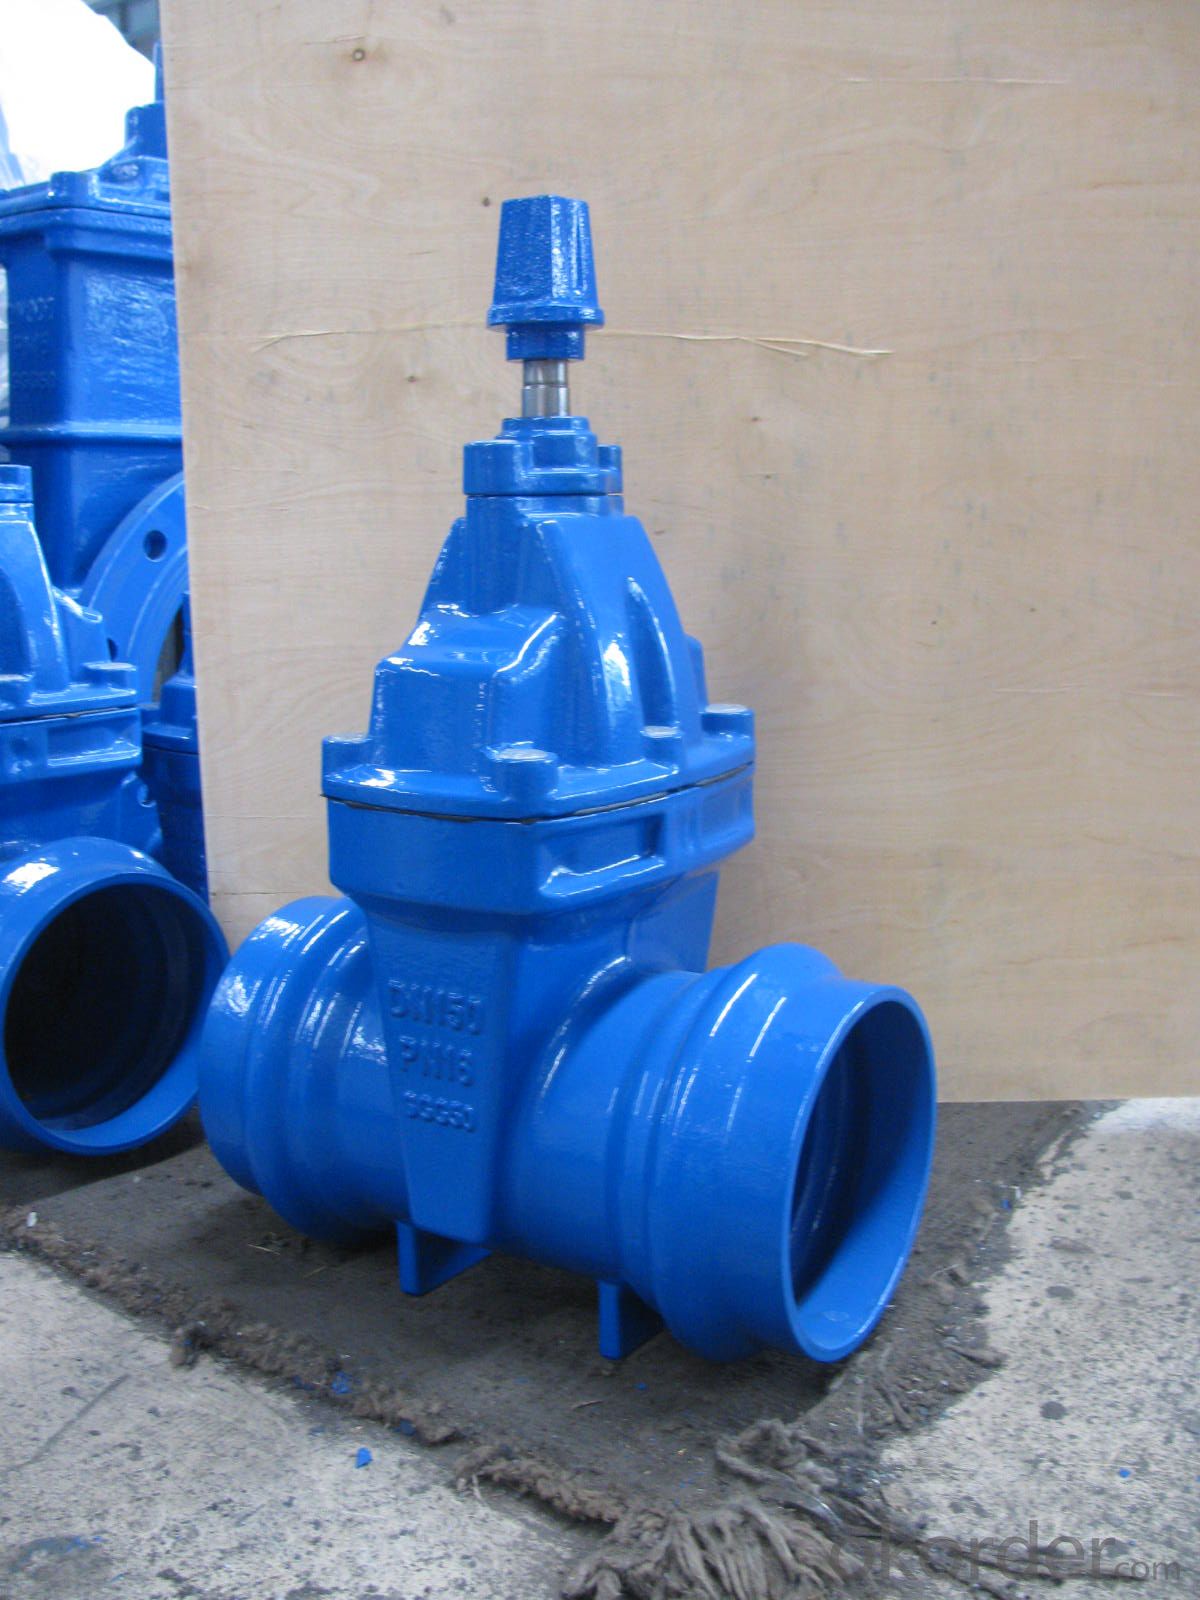 Gate Valve with Competitive Price with 60year Old Valve Manufacturer